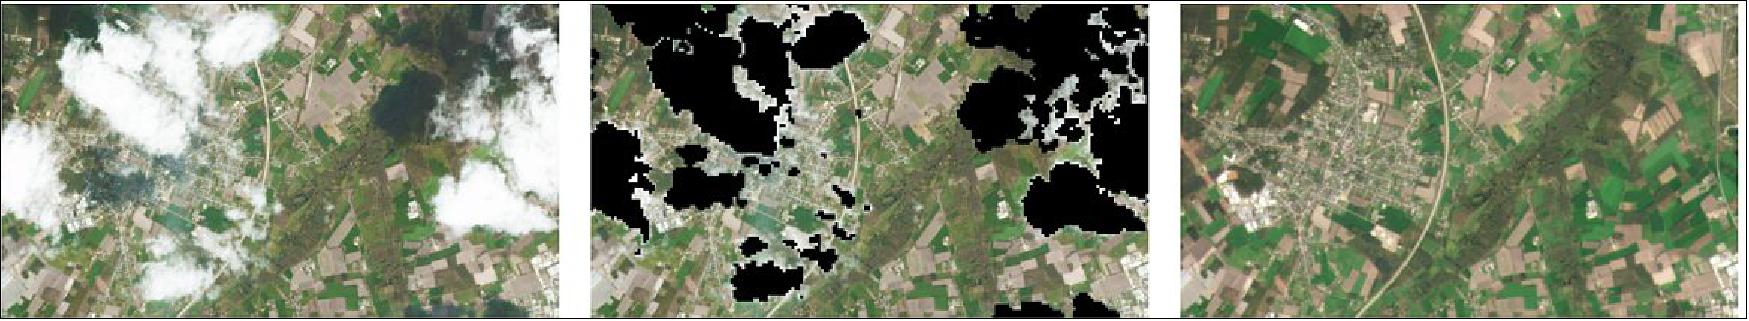 Figure 8: SAR enabling advanced imaging of areas previously obscured by cloud cover over Eksel, Belgium in 2021, image credit: Planet Labs Inc.)